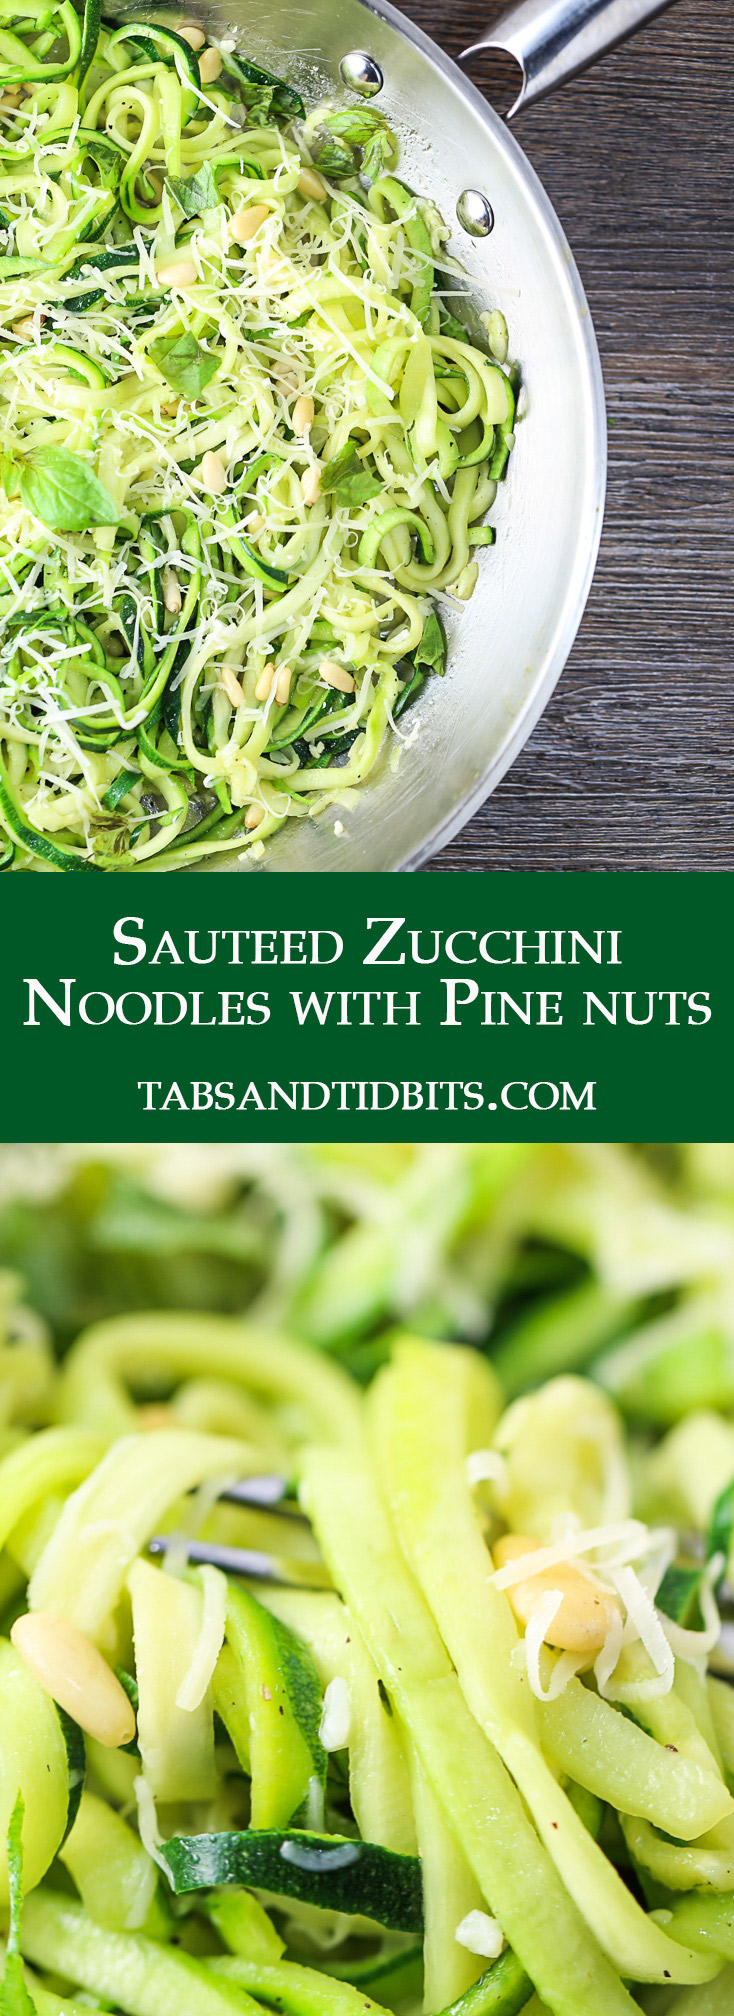 Sauteed Zucchini Noodles with Pine Nuts is a healthy and fast meal for a busy weeknight or anytime you want something healthy and convenient.